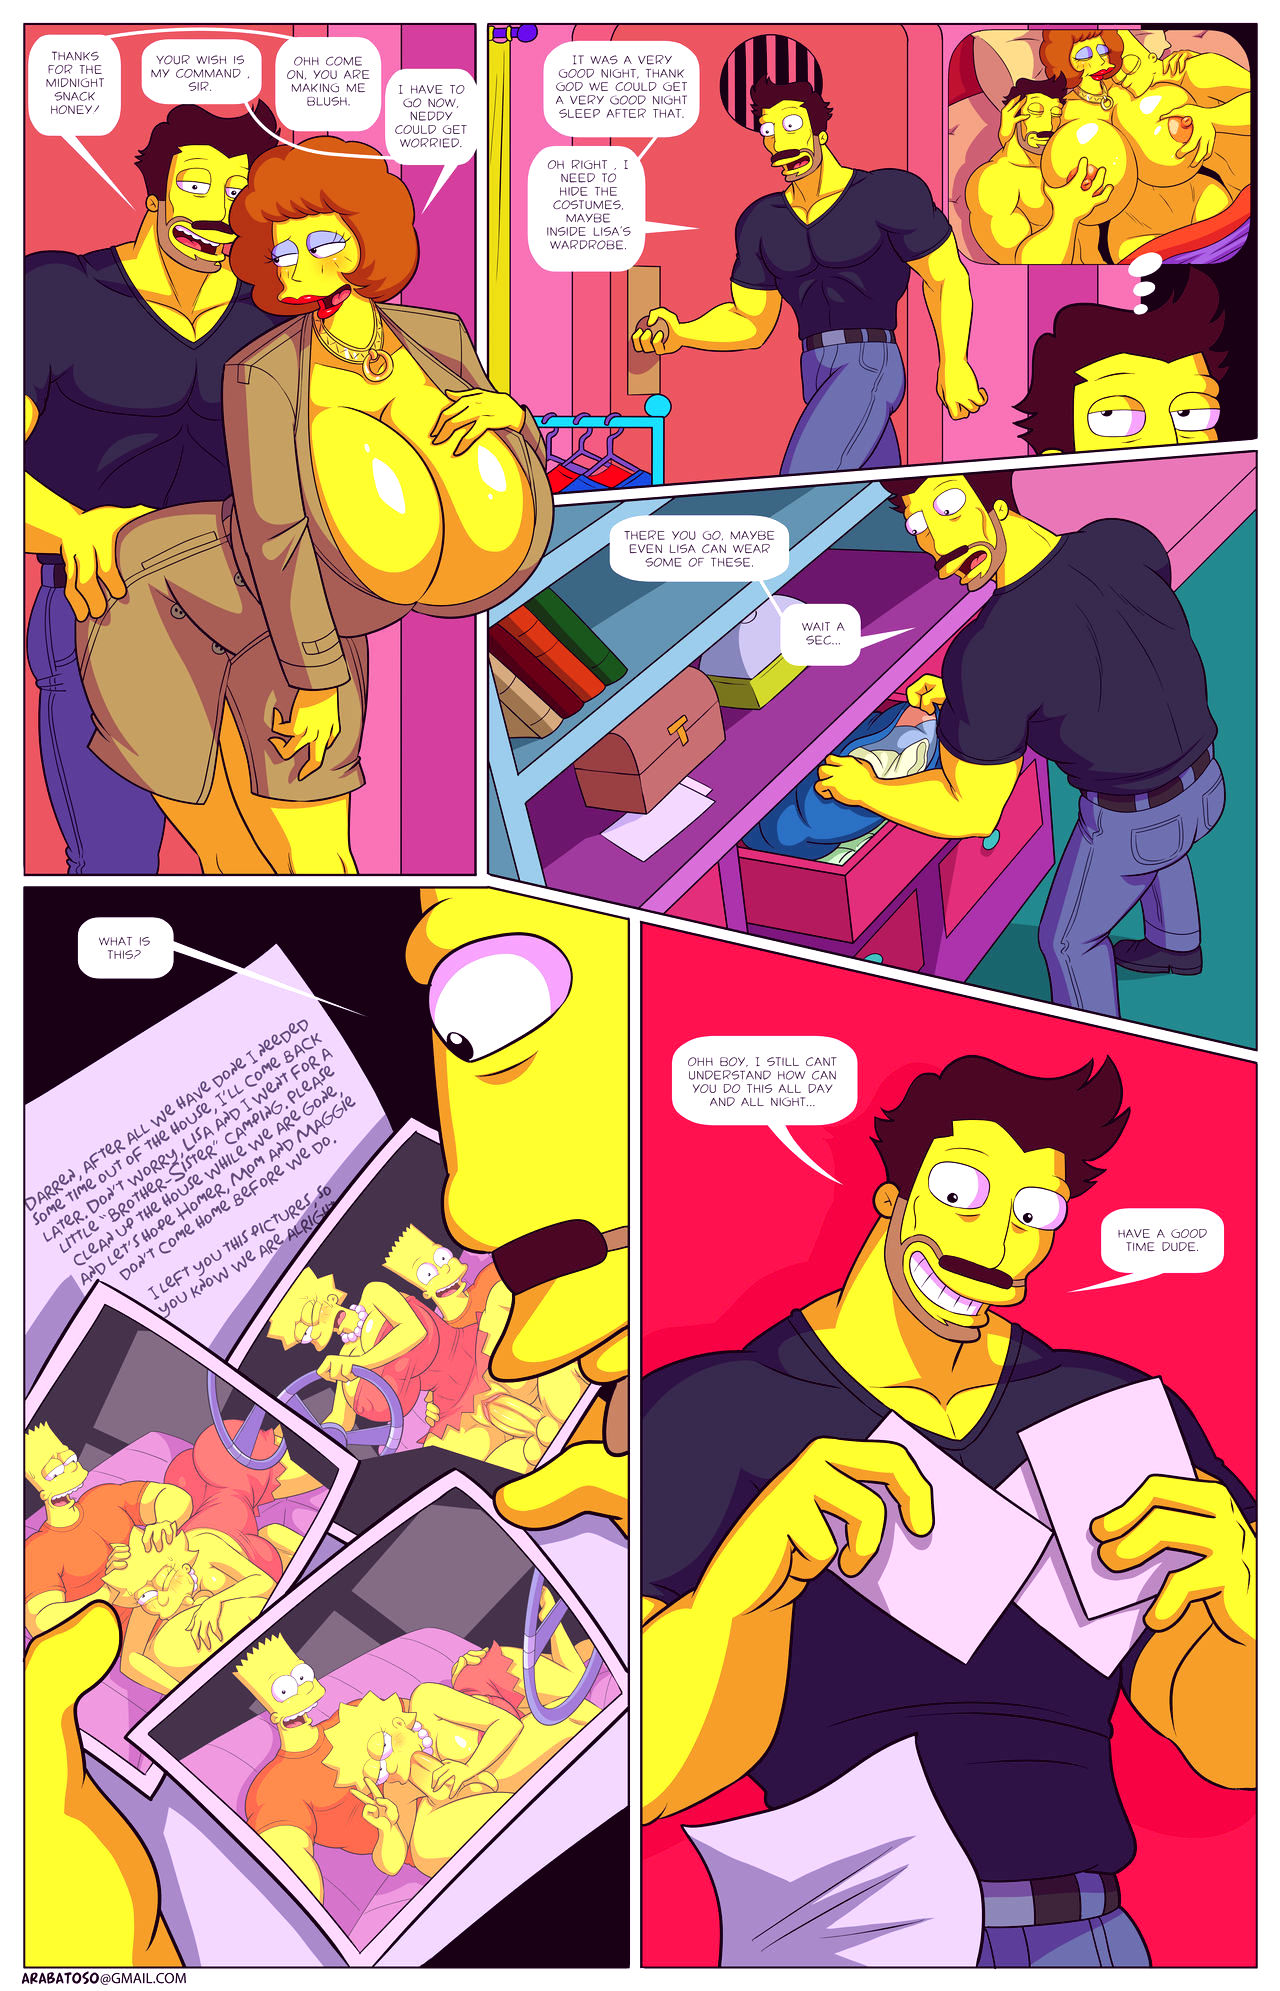 Darrens adventure or welcome to springfield porn comic picture 52